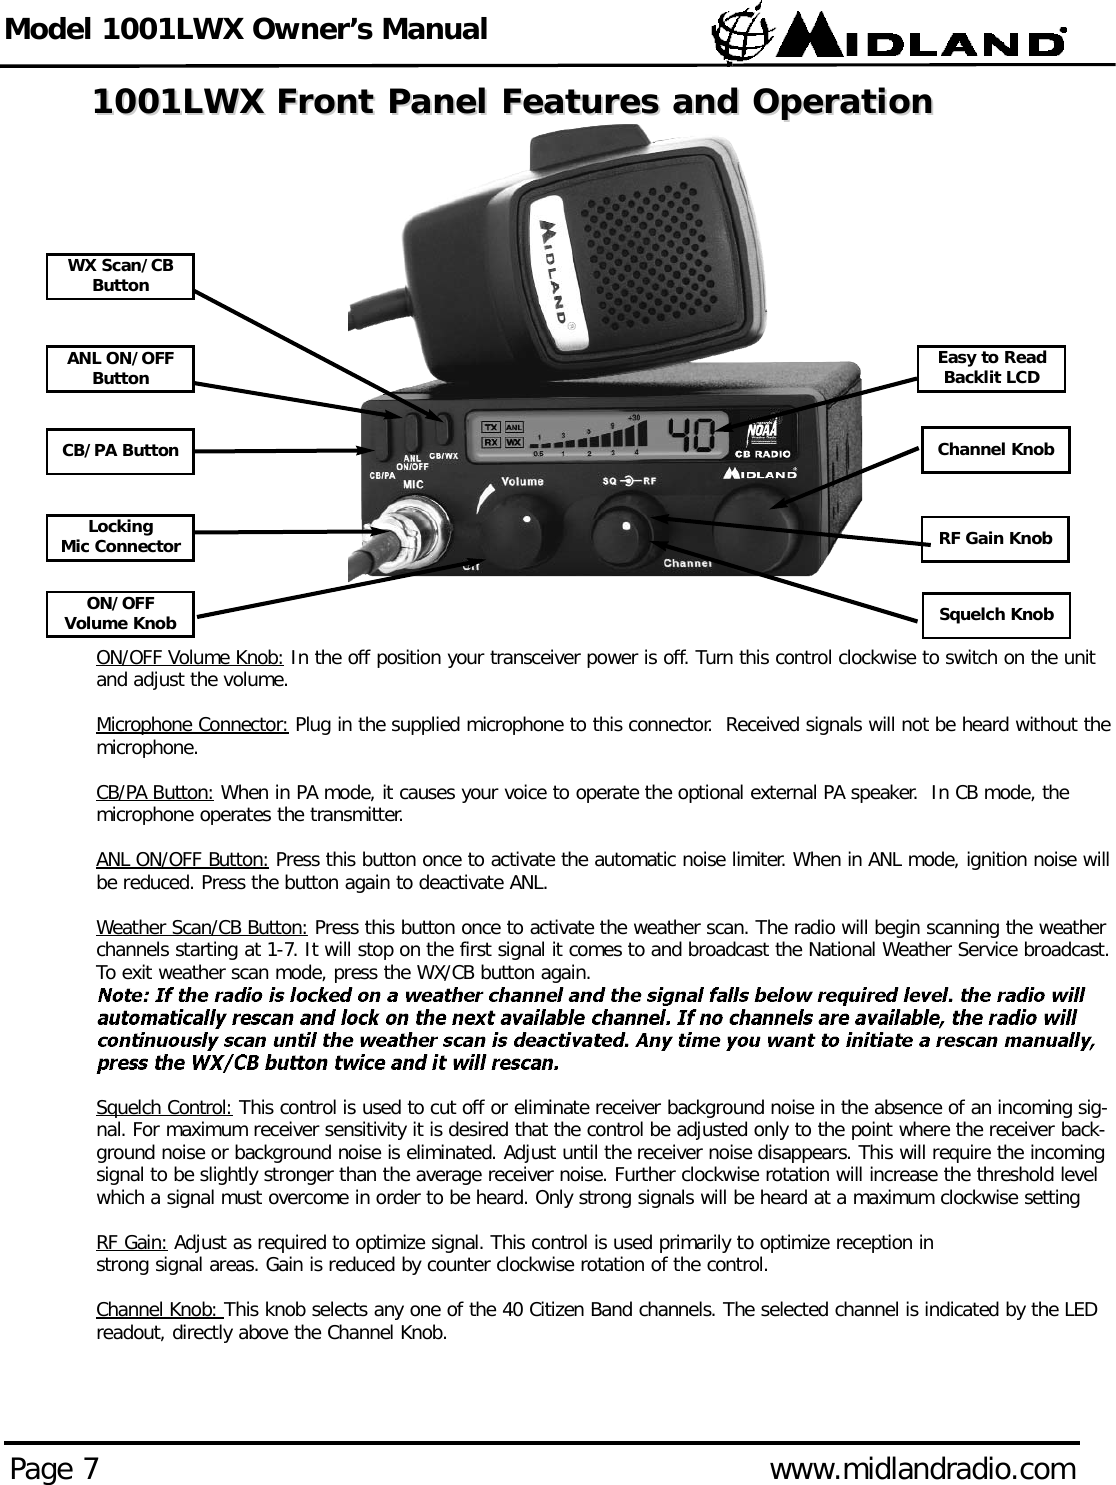 Model 1001LWX Owner’s ManualPage 7 www.midlandradio.com1001LWX Front Panel Features and Operation1001LWX Front Panel Features and OperationON/OFF Volume Knob: In the off position your transceiver power is off. Turn this control clockwise to switch on the unitand adjust the volume.Microphone Connector: Plug in the supplied microphone to this connector.  Received signals will not be heard without themicrophone.CB/PA Button: When in PA mode, it causes your voice to operate the optional external PA speaker.  In CB mode, themicrophone operates the transmitter.ANL ON/OFF Button: Press this button once to activate the automatic noise limiter. When in ANL mode, ignition noise willbe reduced. Press the button again to deactivate ANL. Weather Scan/CB Button: Press this button once to activate the weather scan. The radio will begin scanning the weatherchannels starting at 1-7. It will stop on the first signal it comes to and broadcast the National Weather Service broadcast.To exit weather scan mode, press the WX/CB button again. Squelch Control: This control is used to cut off or eliminate receiver background noise in the absence of an incoming sig-nal. For maximum receiver sensitivity it is desired that the control be adjusted only to the point where the receiver back-ground noise or background noise is eliminated. Adjust until the receiver noise disappears. This will require the incomingsignal to be slightly stronger than the average receiver noise. Further clockwise rotation will increase the threshold levelwhich a signal must overcome in order to be heard. Only strong signals will be heard at a maximum clockwise settingRF Gain: Adjust as required to optimize signal. This control is used primarily to optimize reception in strong signal areas. Gain is reduced by counter clockwise rotation of the control.Channel Knob: This knob selects any one of the 40 Citizen Band channels. The selected channel is indicated by the LEDreadout, directly above the Channel Knob.LockingMic ConnectorCB/PA ButtonANL ON/OFFButtonWX Scan/CBButtonON/OFFVolume Knob Squelch KnobChannel KnobEasy to ReadBacklit LCDRF Gain Knob